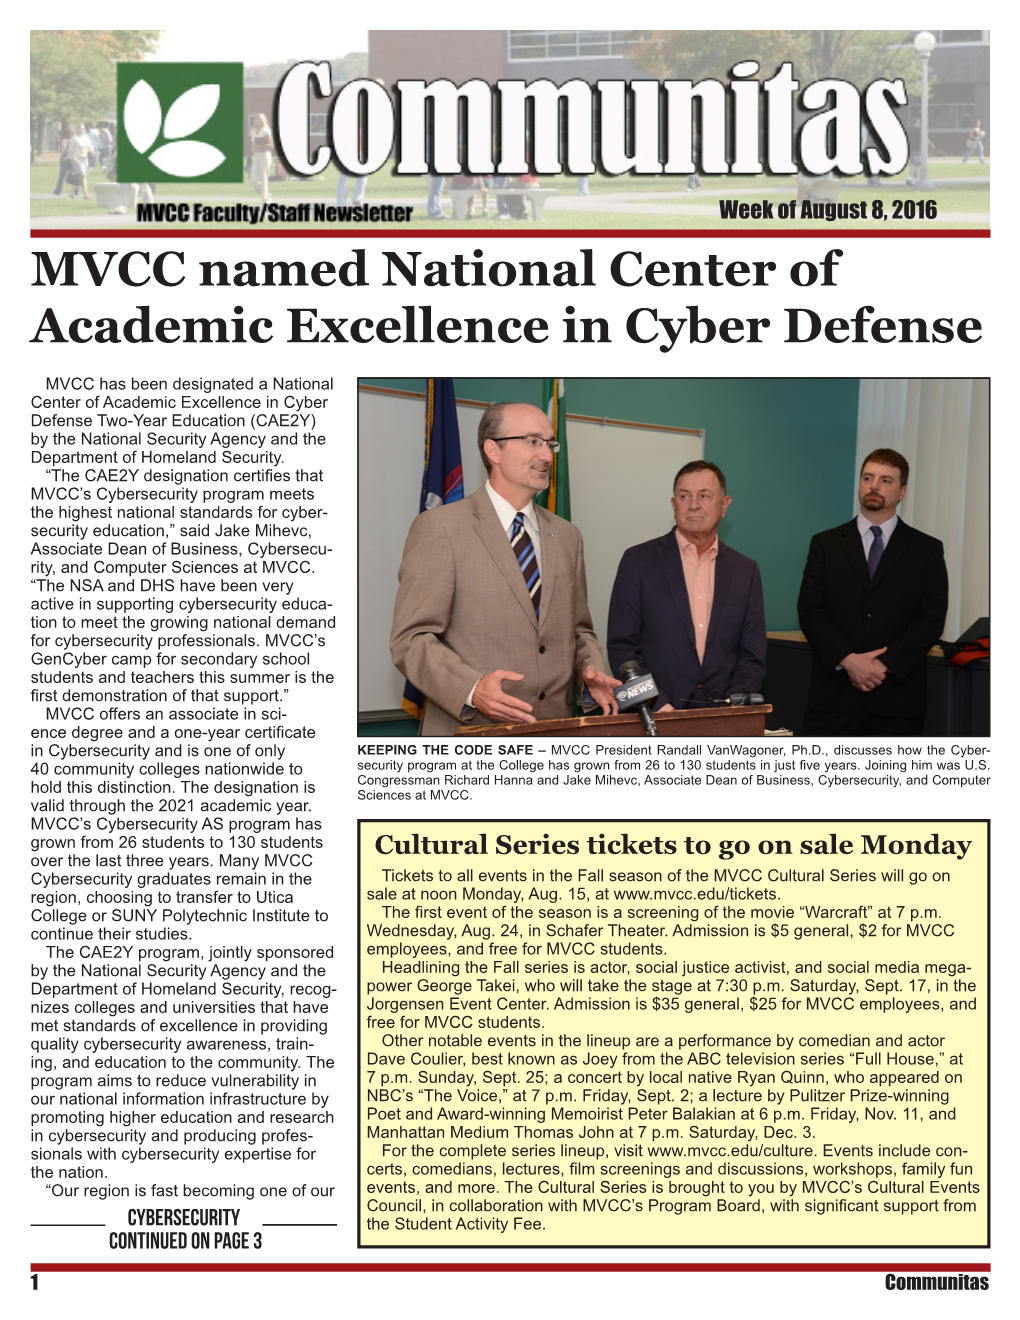 MVCC Named National Center of Academic Excellence in Cyber Defense